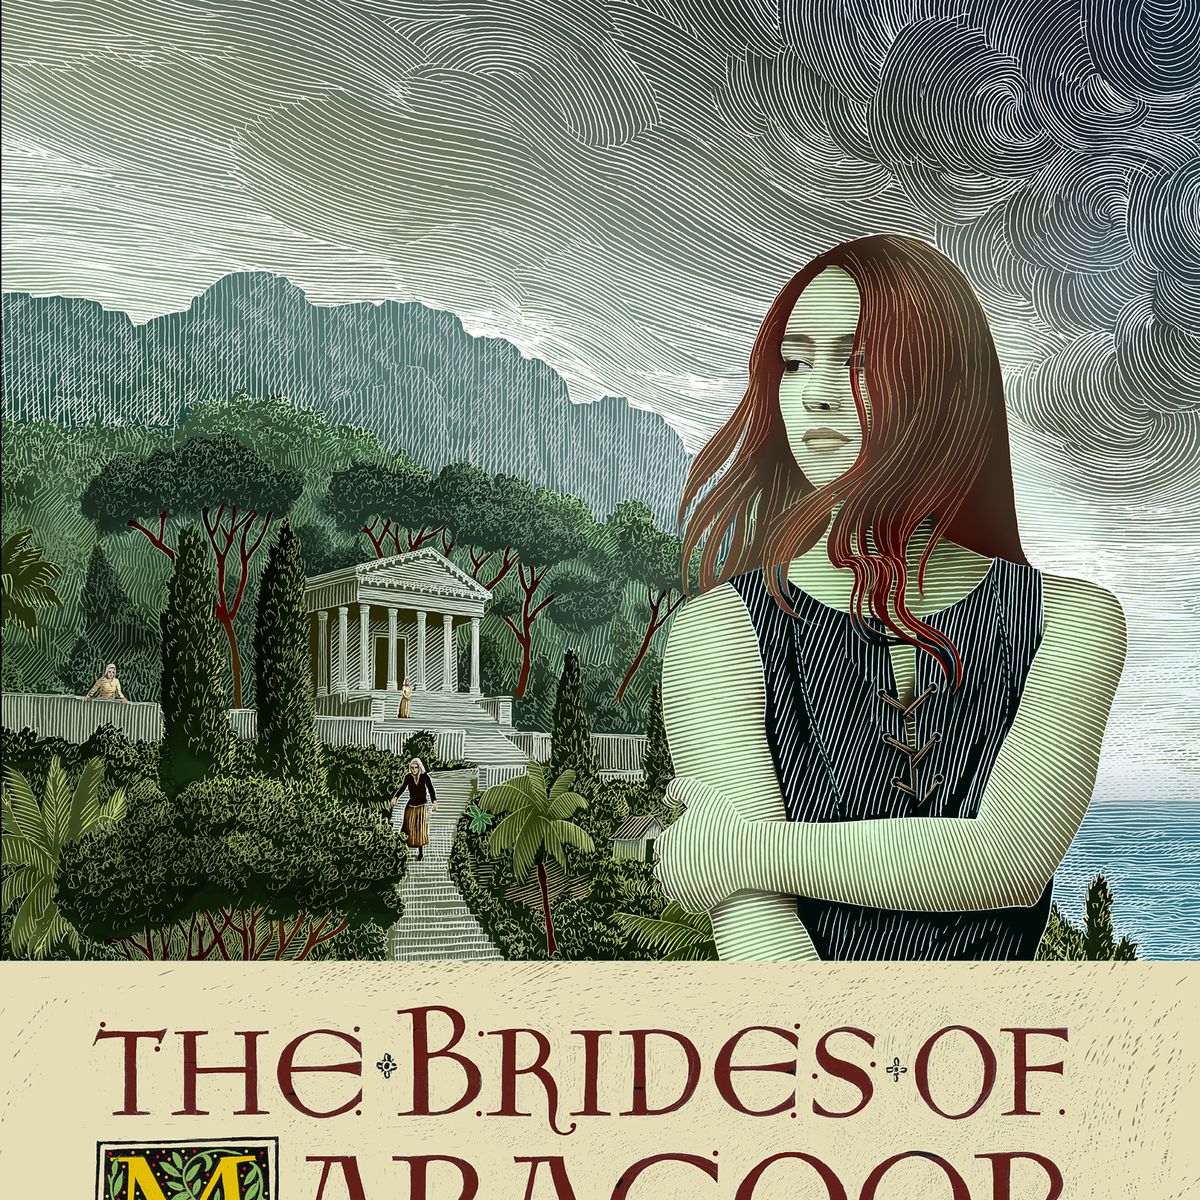 The cover of The Brides of Maracoor by Gregory Maguire